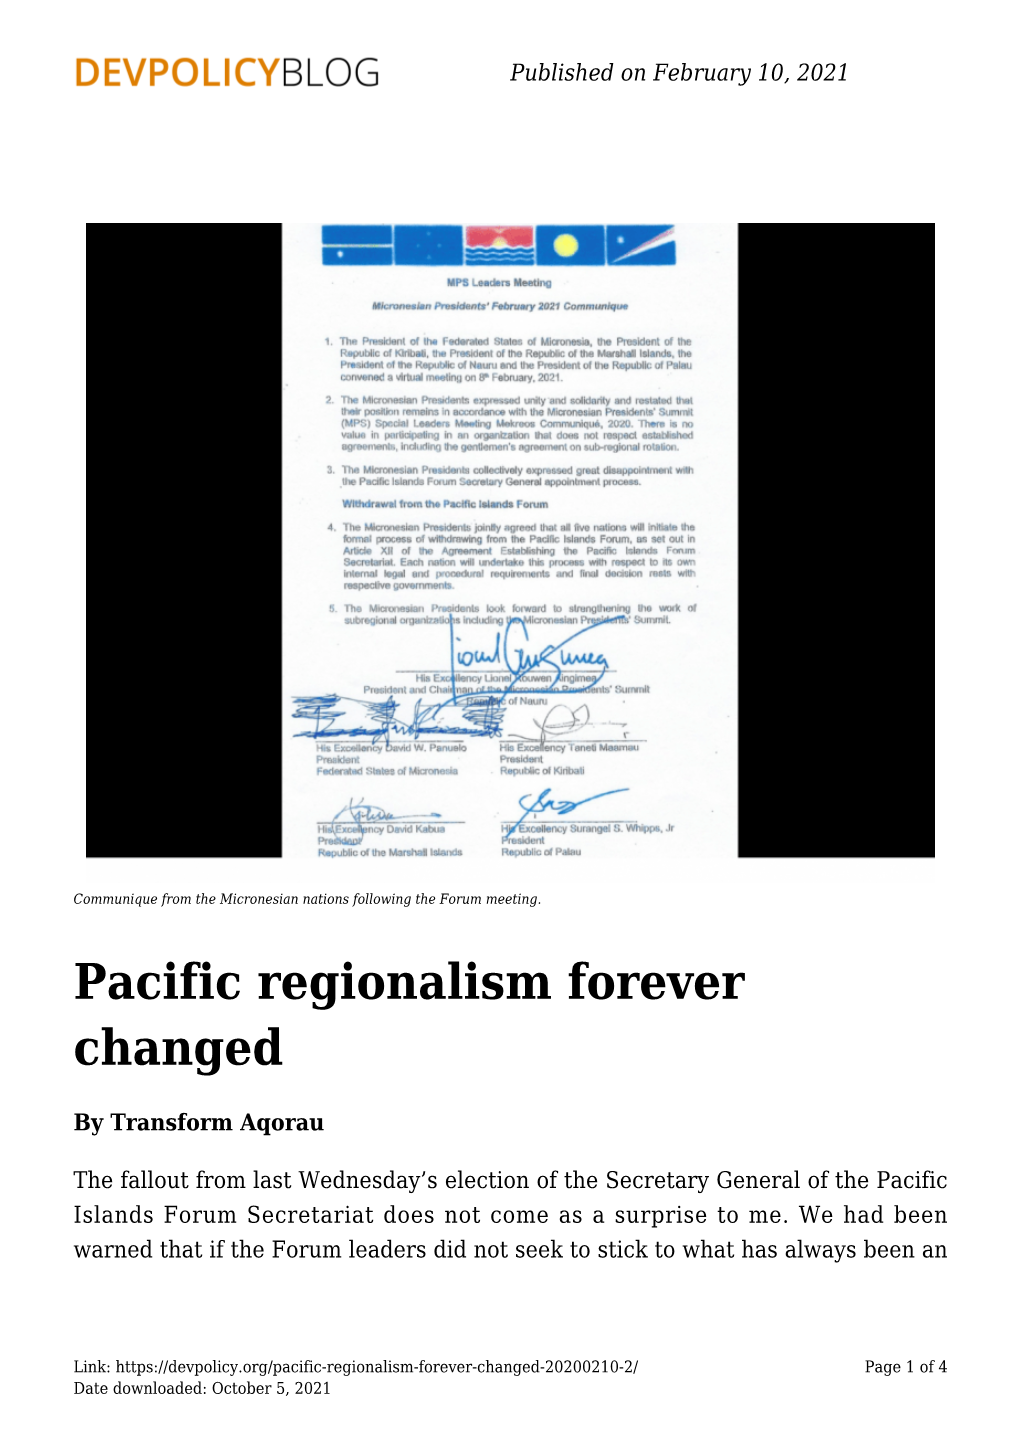 Pacific Regionalism Forever Changed